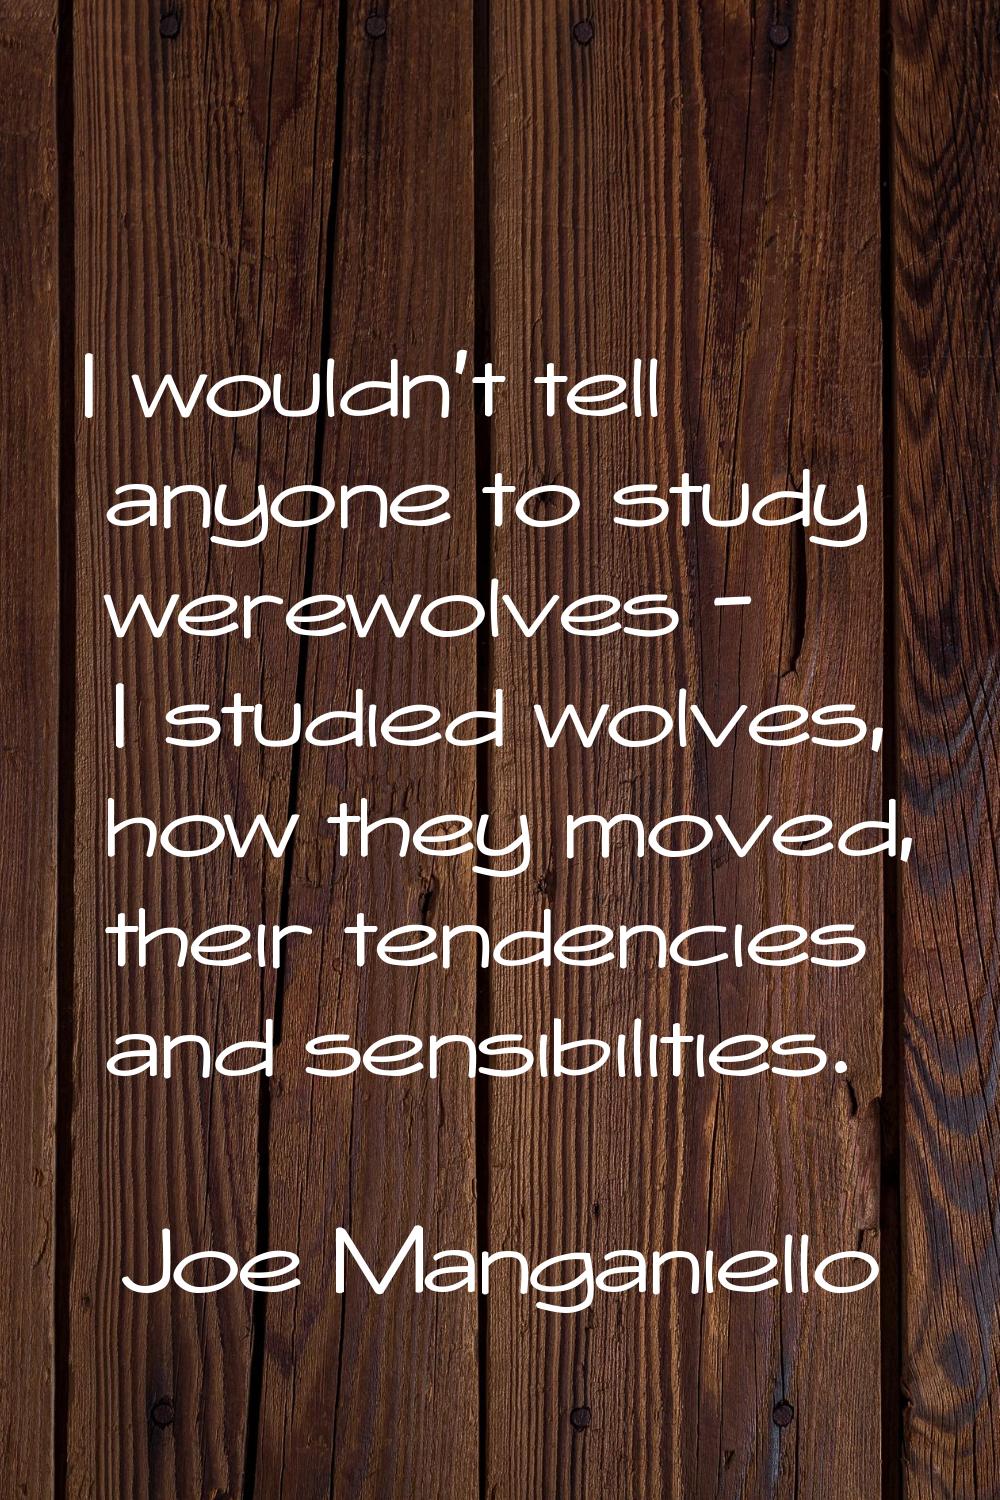 I wouldn't tell anyone to study werewolves - I studied wolves, how they moved, their tendencies and